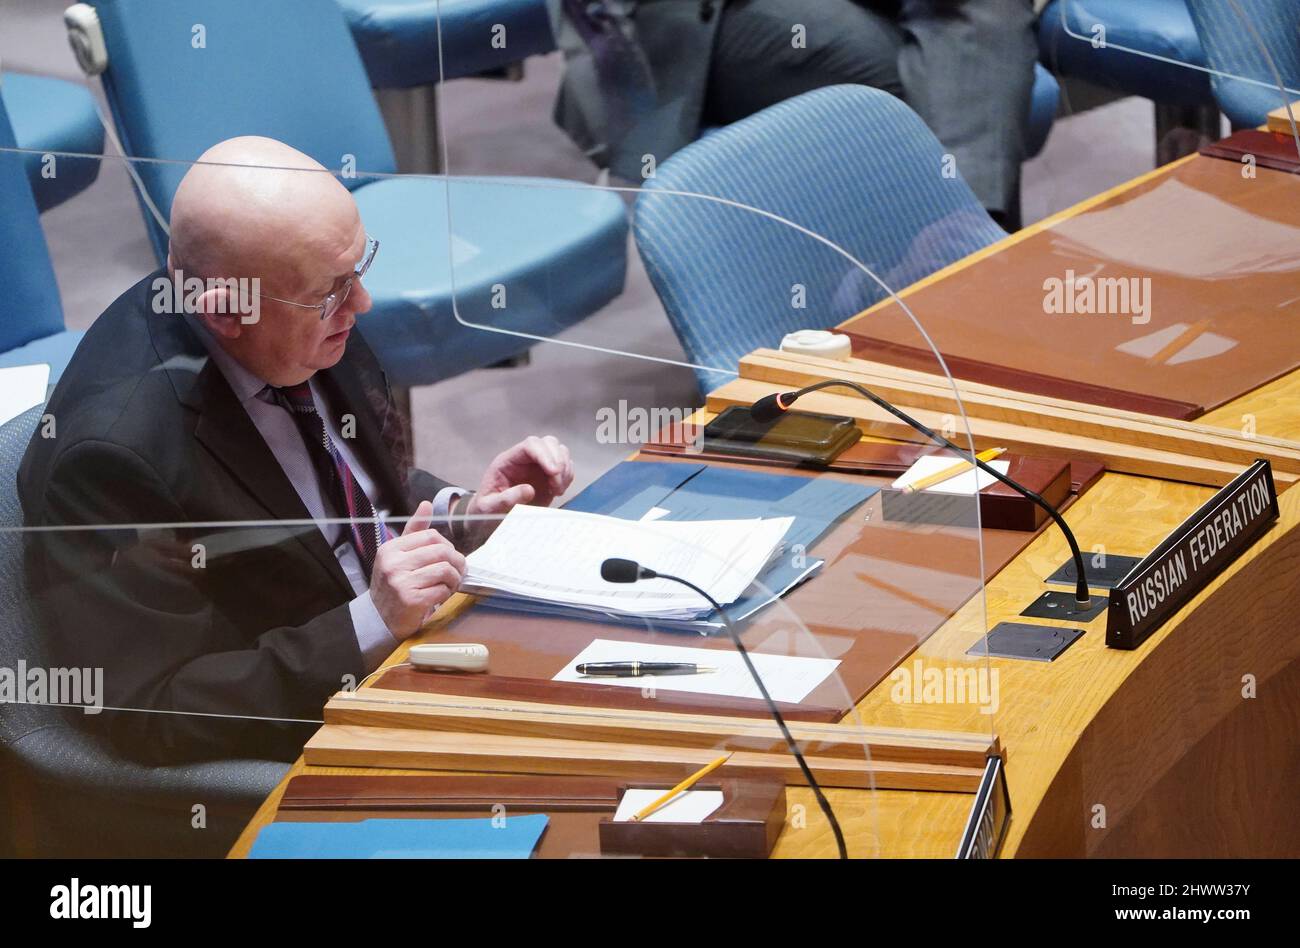 Russia's Ambassador to the United Nations Vassily Nebenzia speaks during a meeting of the United Nations Security Council on Threats to International Peace and Security, following Russia's invasion of Ukraine, in New York City, U.S., March 7, 2022. REUTERS/Carlo Allegri Stock Photo